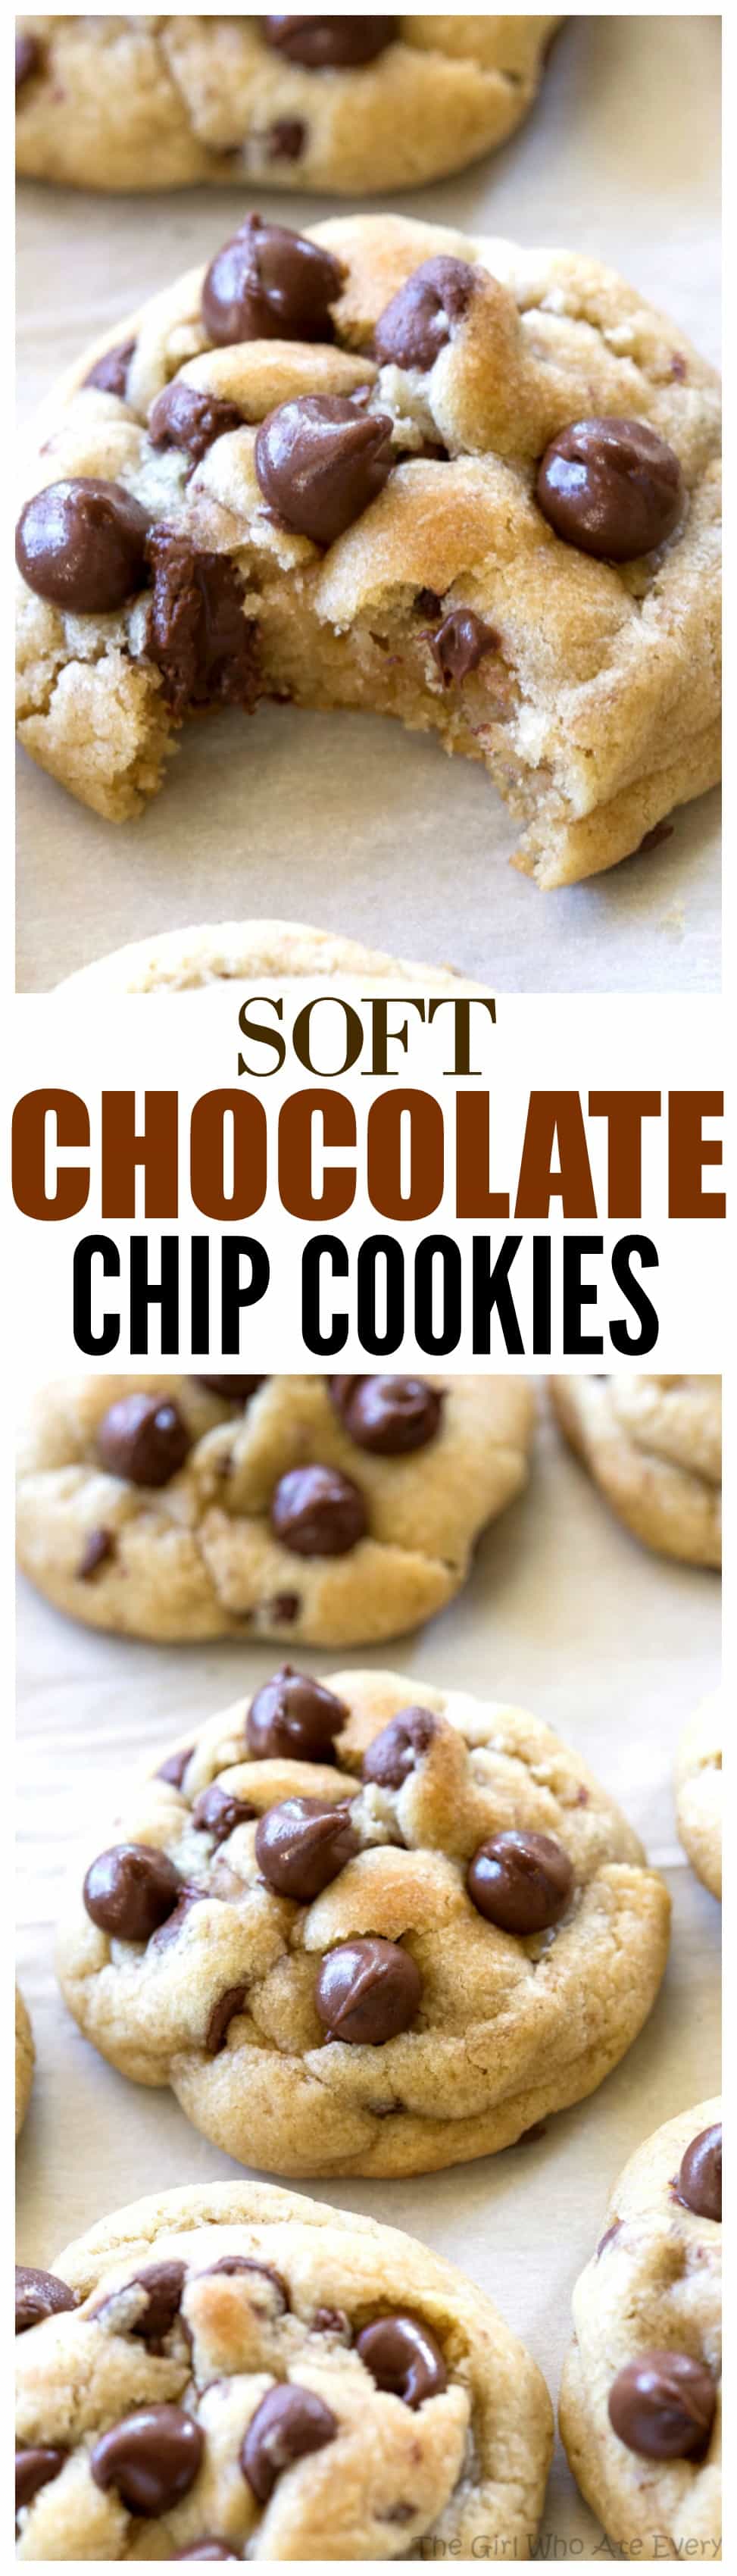 Chocolate Chip Cookies - a tried and true recipe with a secret ingredient to keep them soft! #soft #chocolate #chip #cookie #recipe